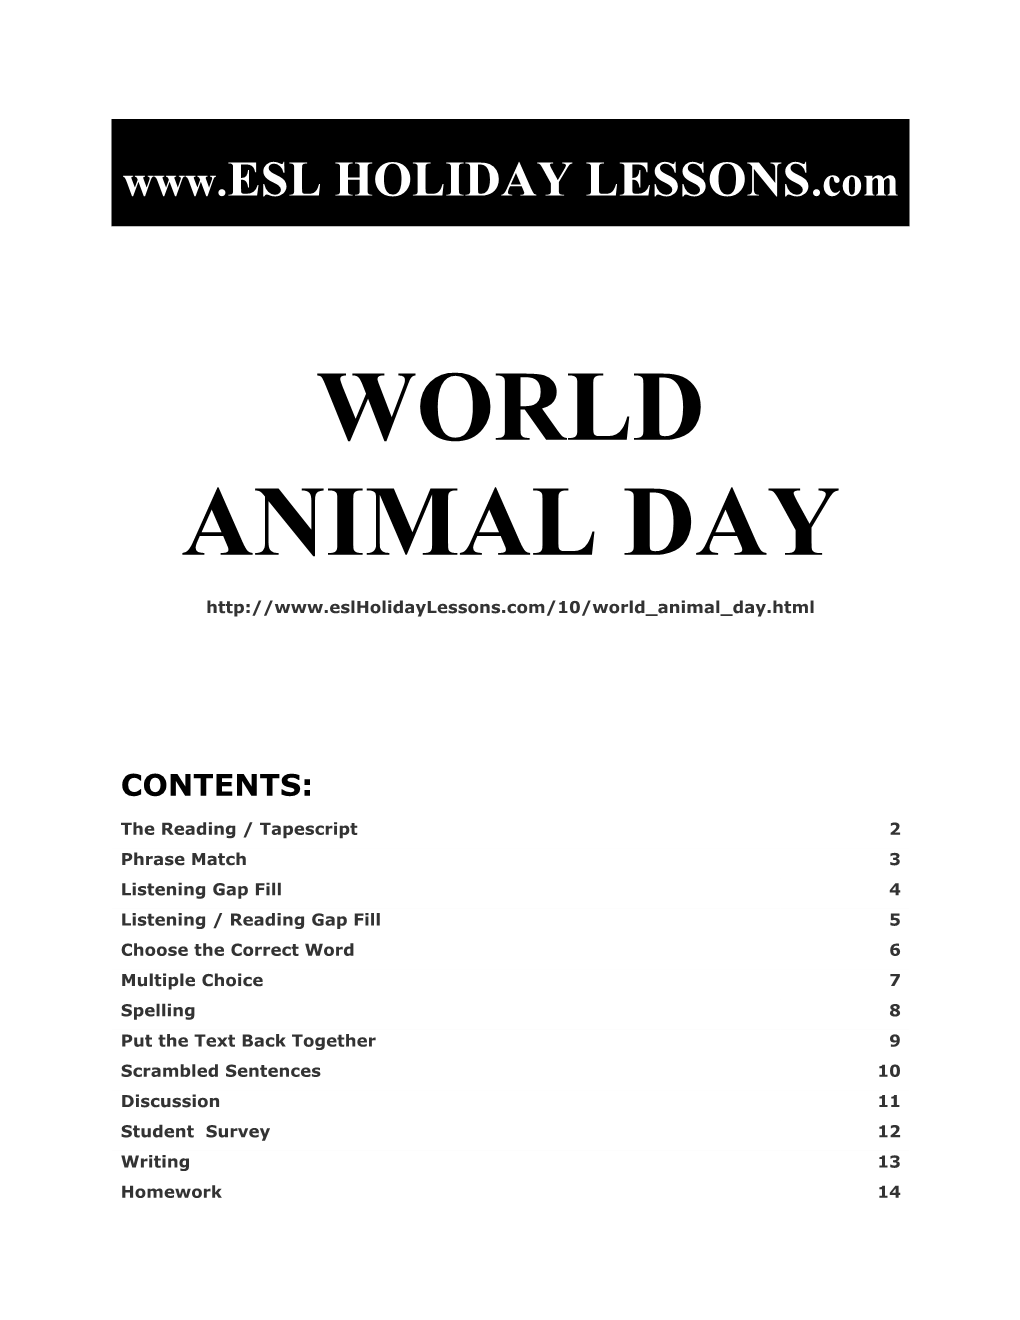 Holiday Lessons - World Animal Day